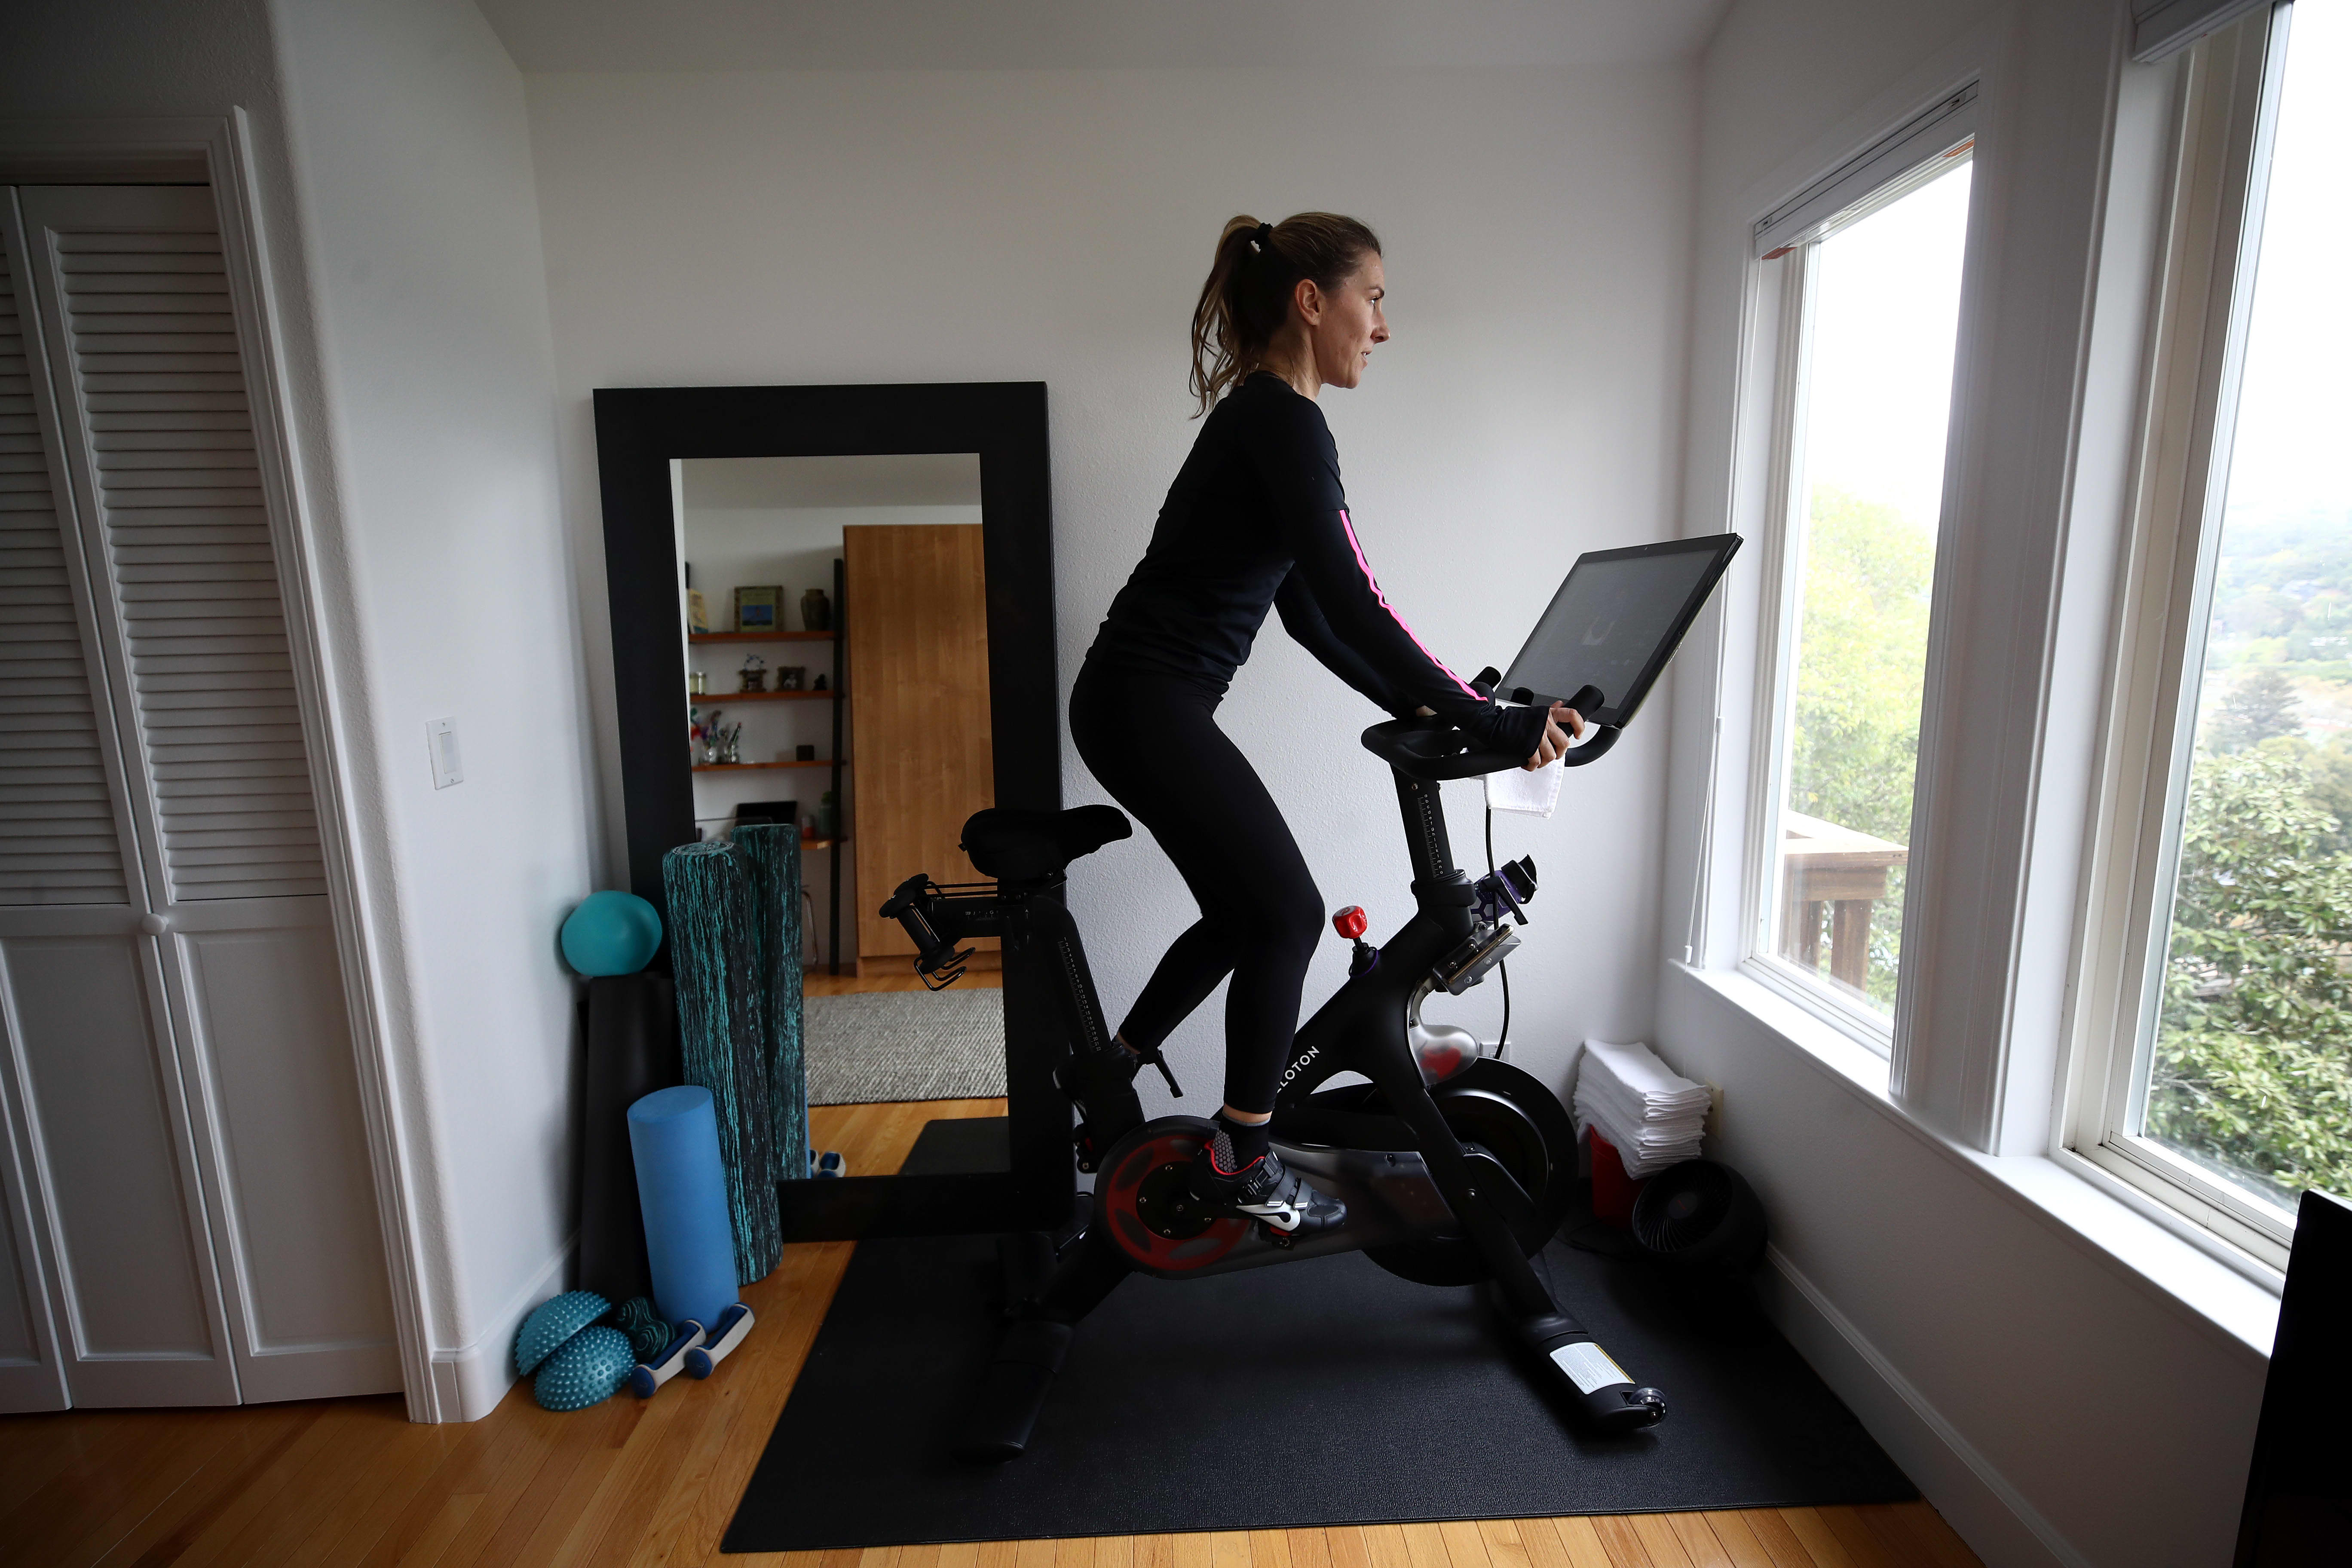 Peloton shares are soaring on potential takeover talks. But here’s why a deal might not happen